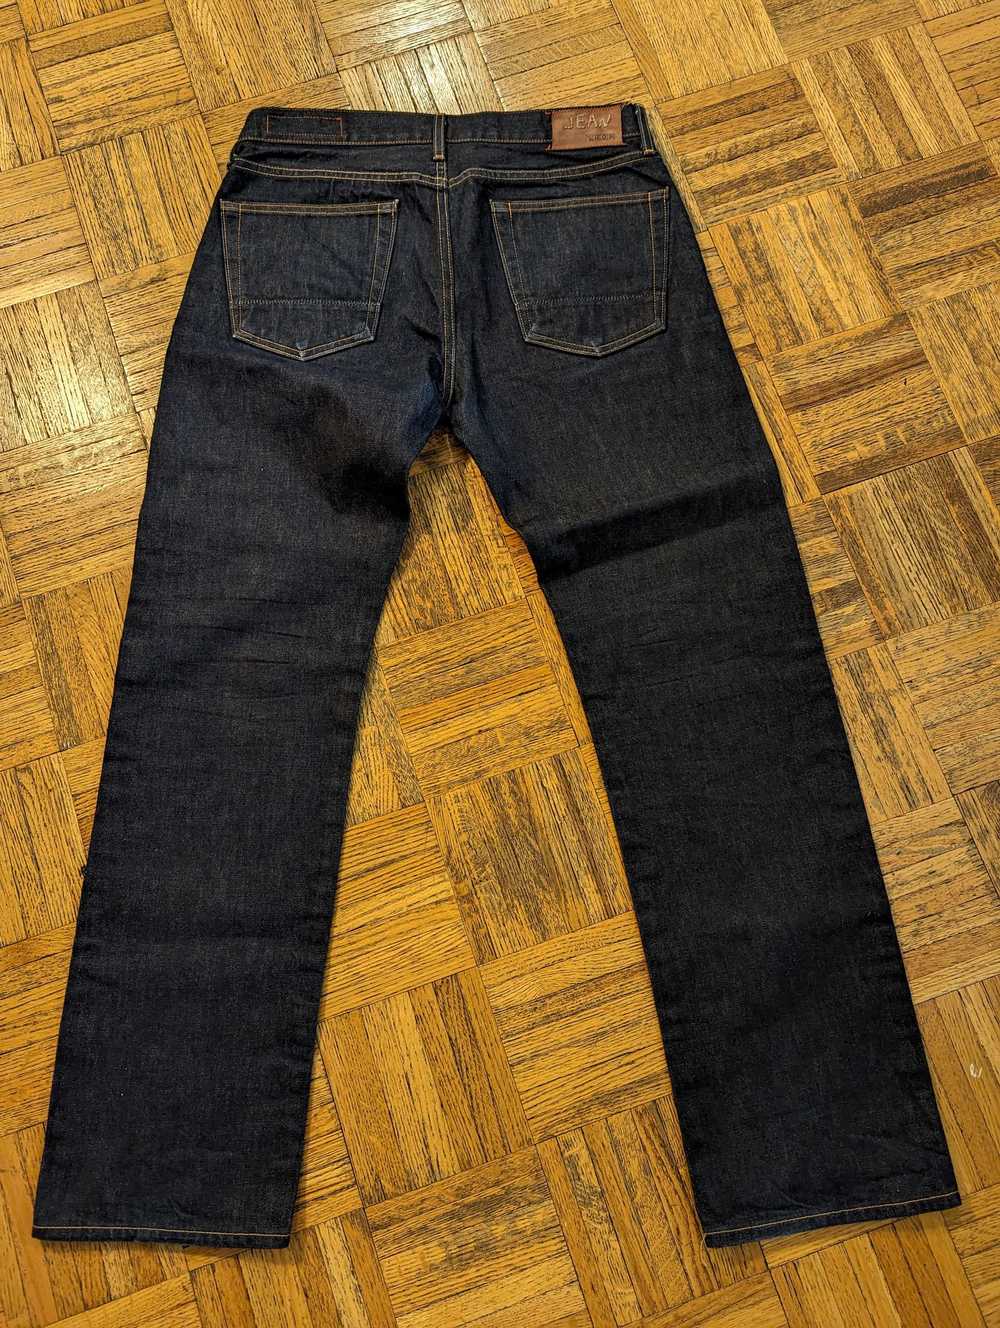 Jean Shop Selvedge jeans, made in USA - image 10